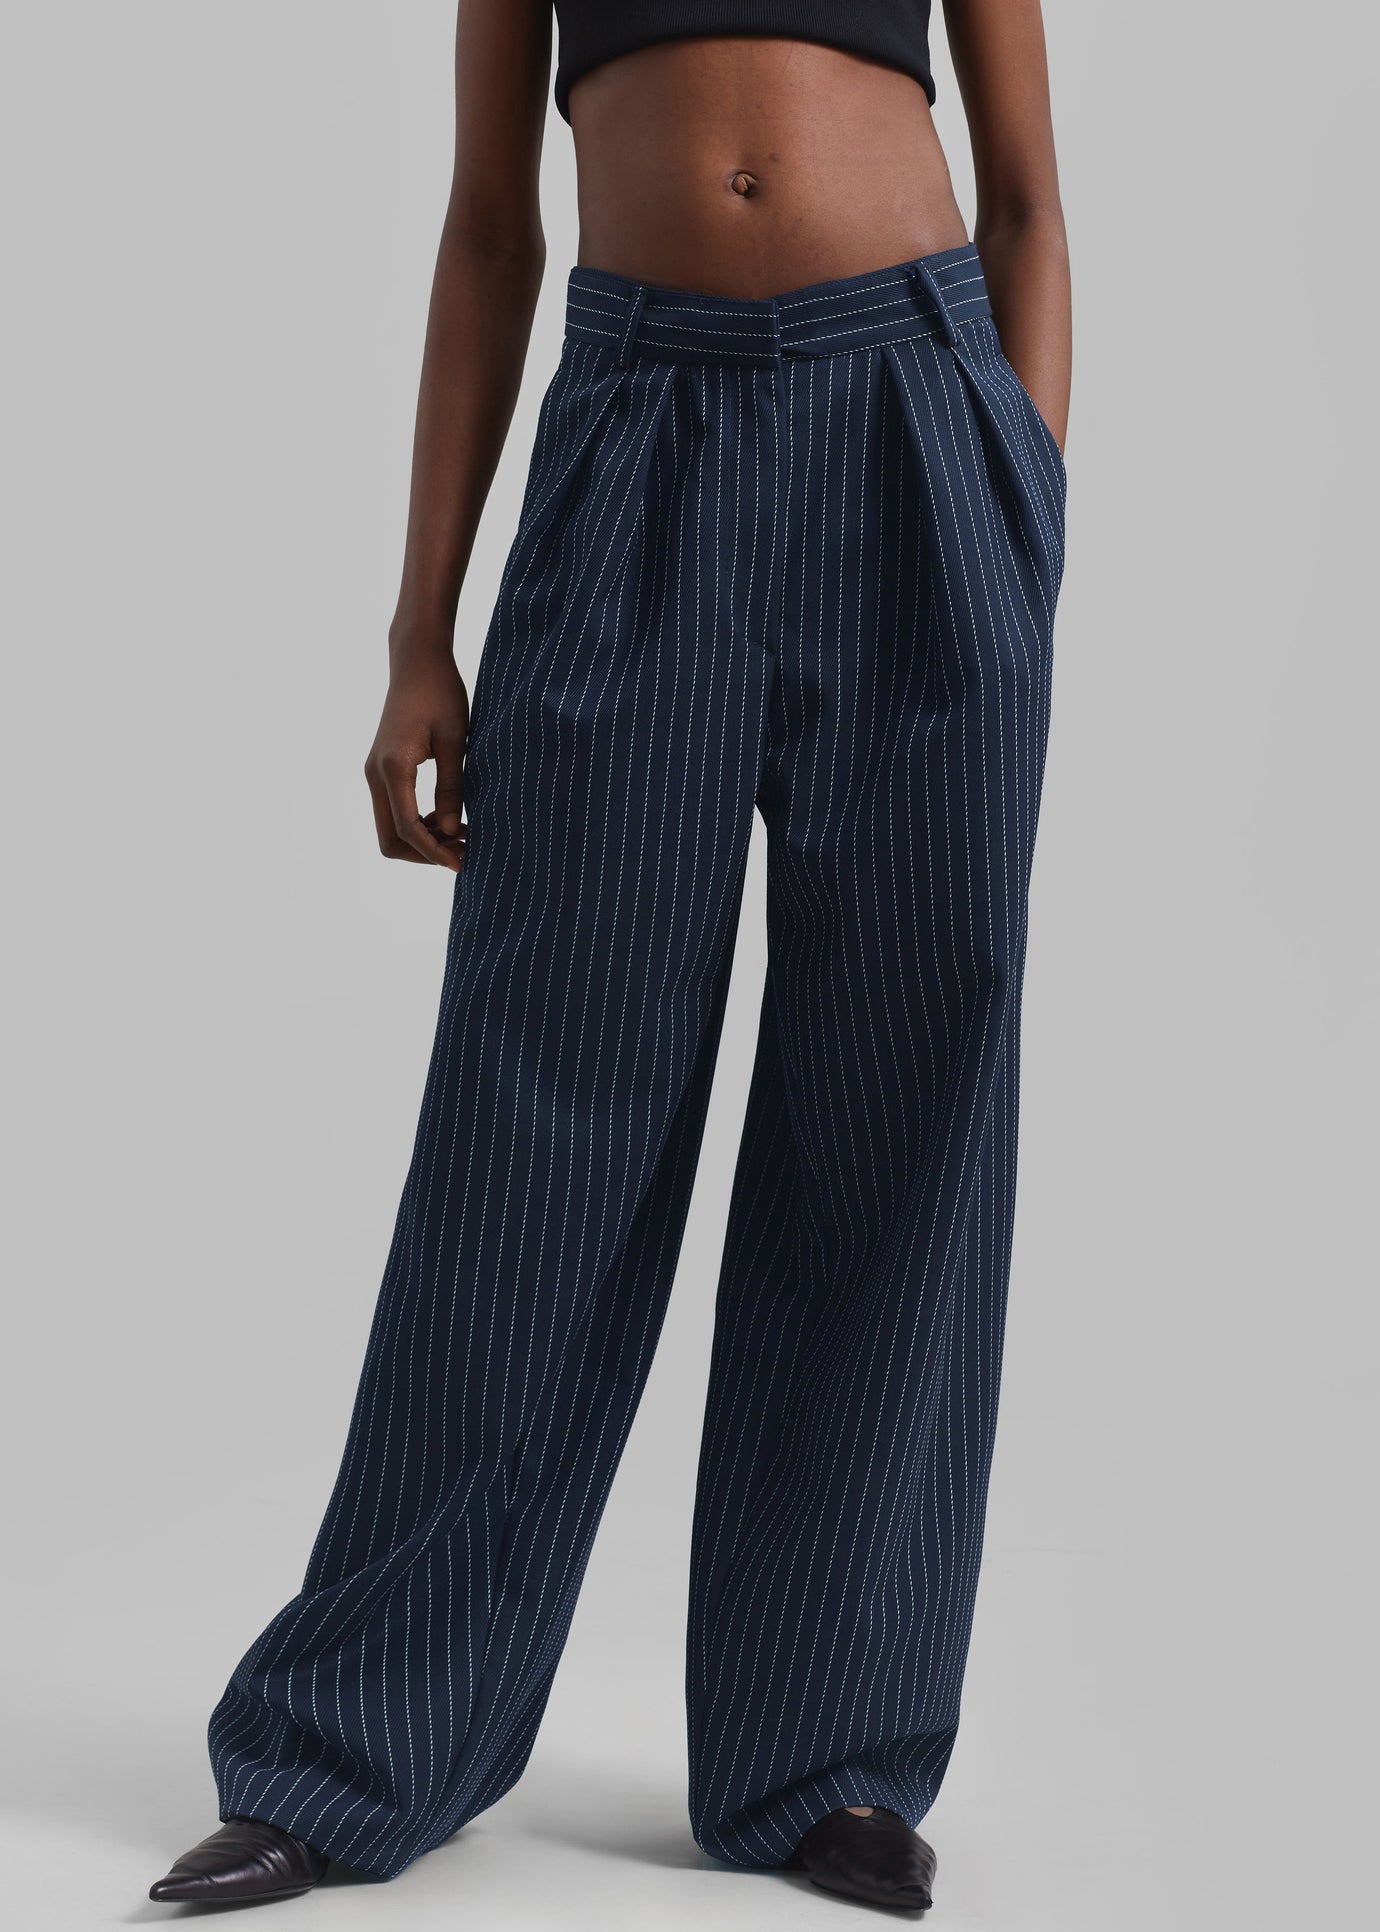 Ripley Pleated Twill Trousers - Navy/White Pinstripe - 1